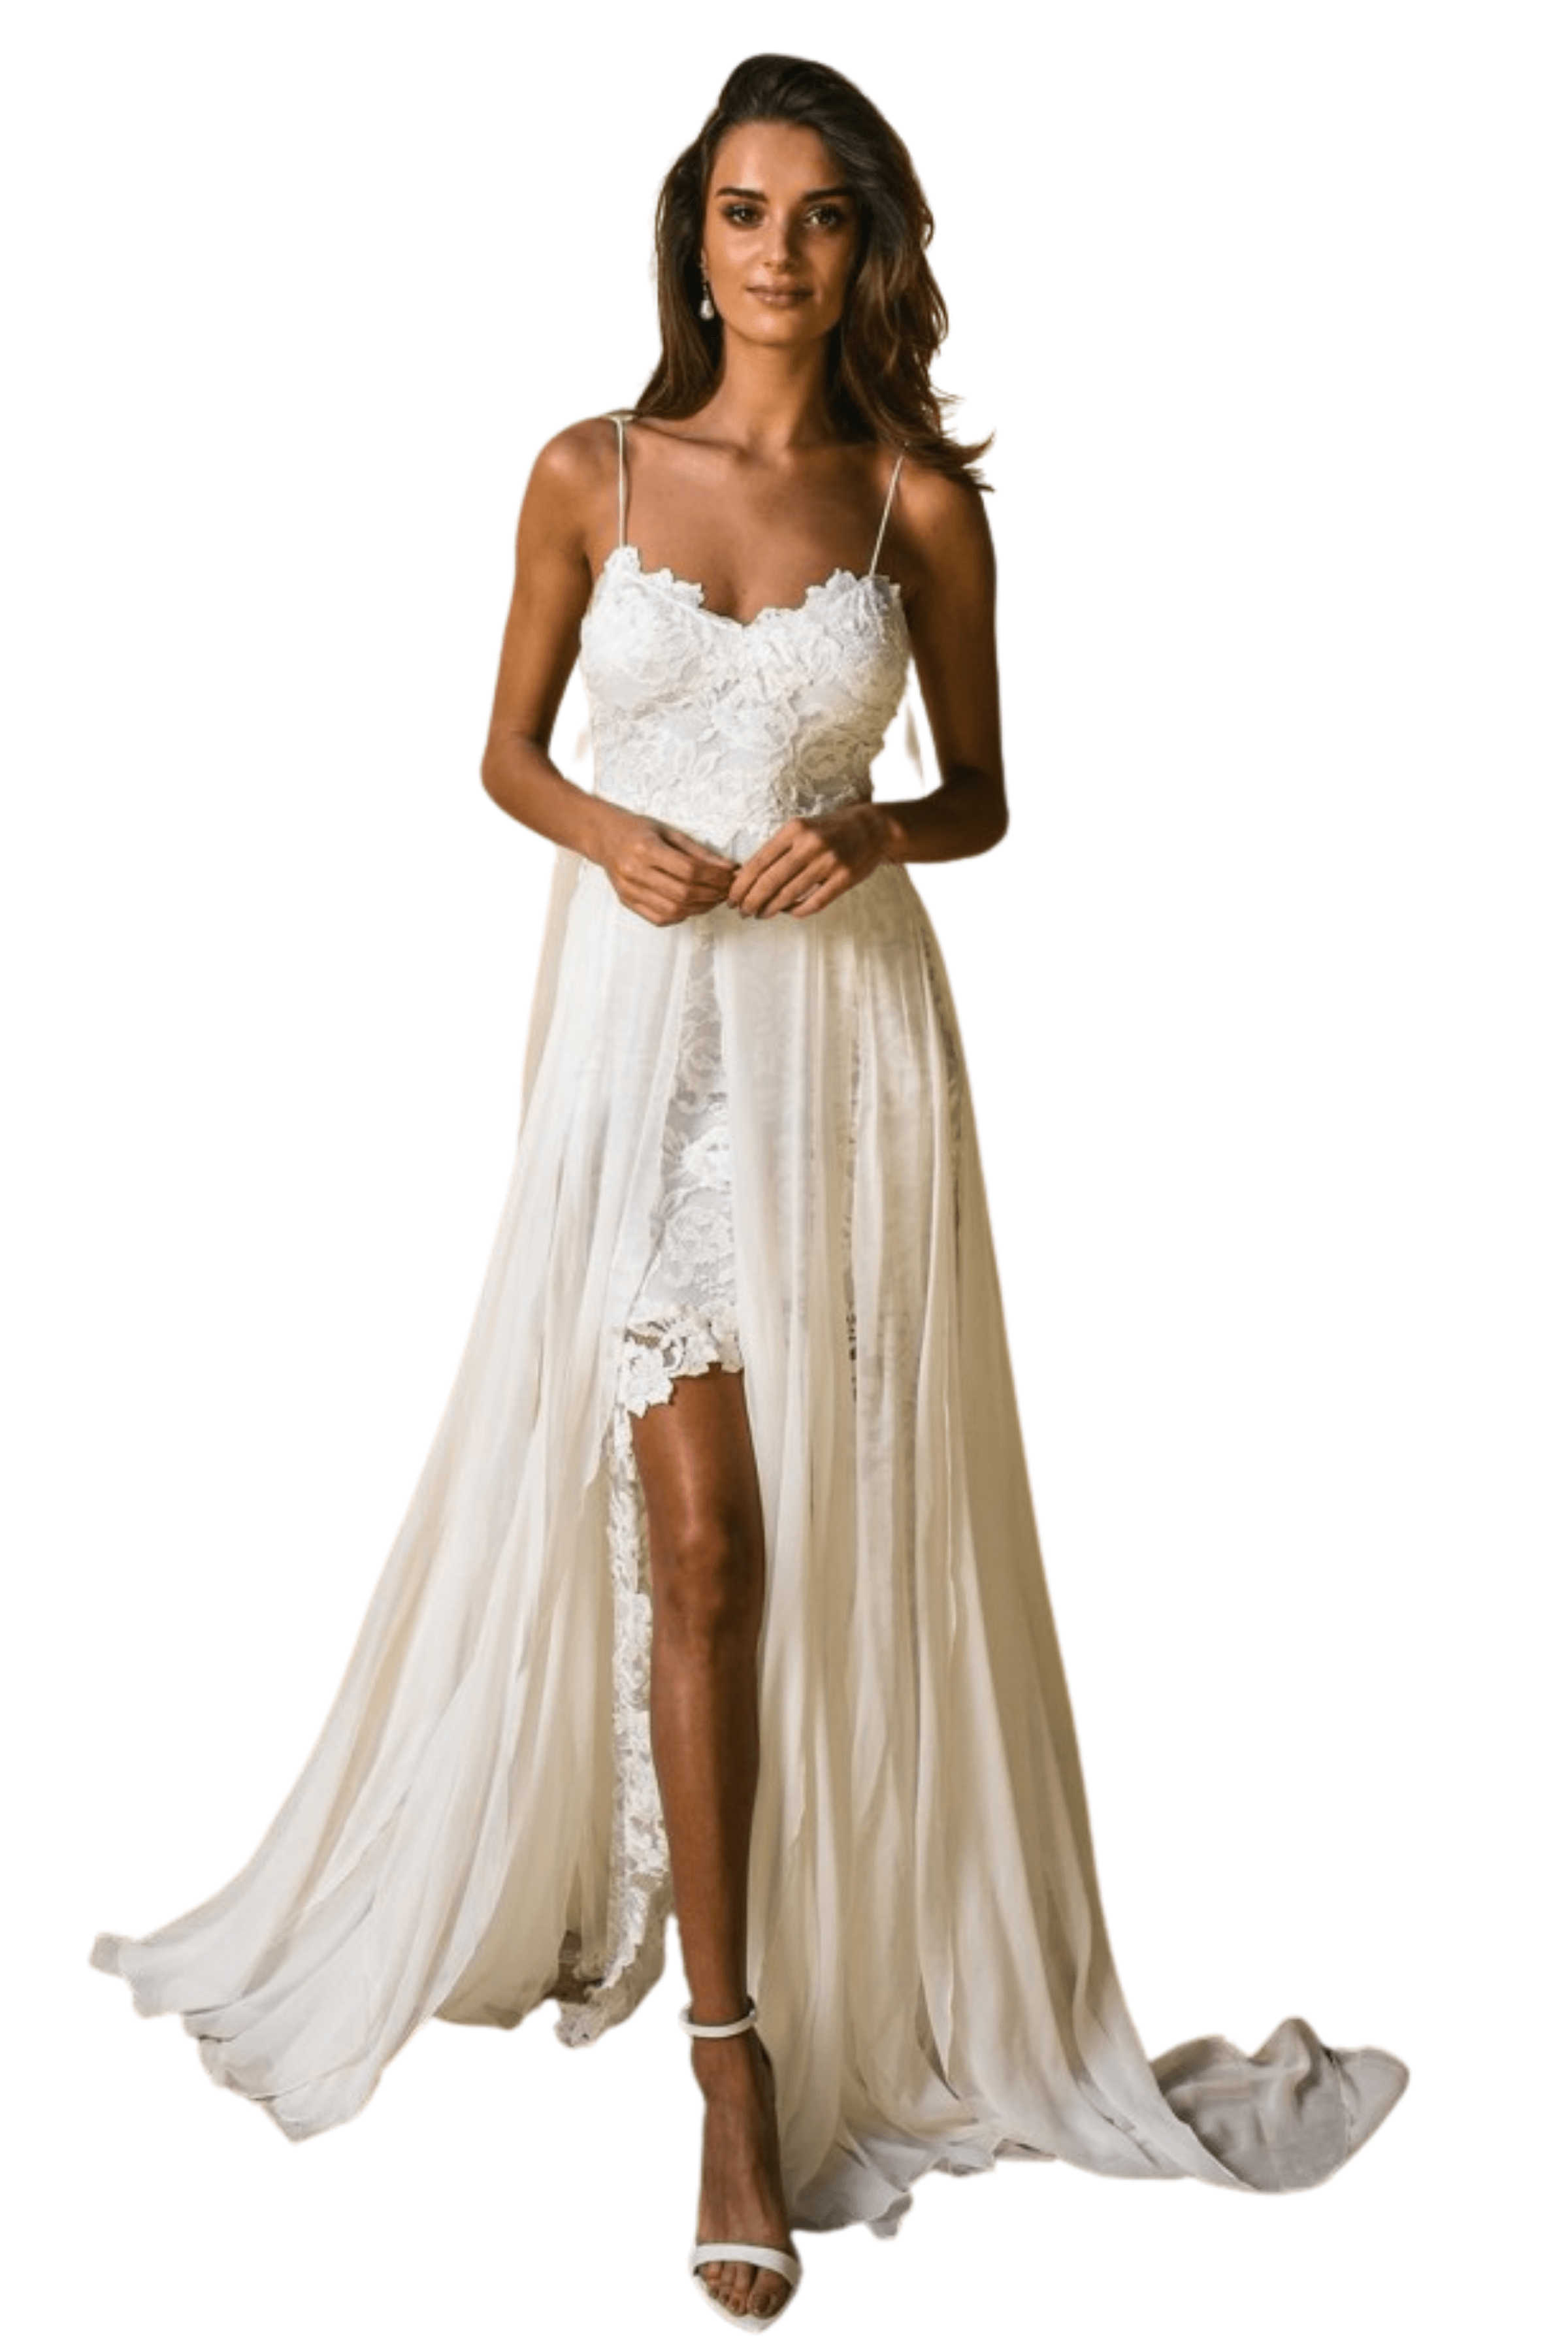 Grace Loves Lace GRACE LOVES LACE Hollie Gown (White)- RRP $2,400 - grace-loves-lace-hollie-gown-white--rrp-400-dress-for-a-night-30754442.png